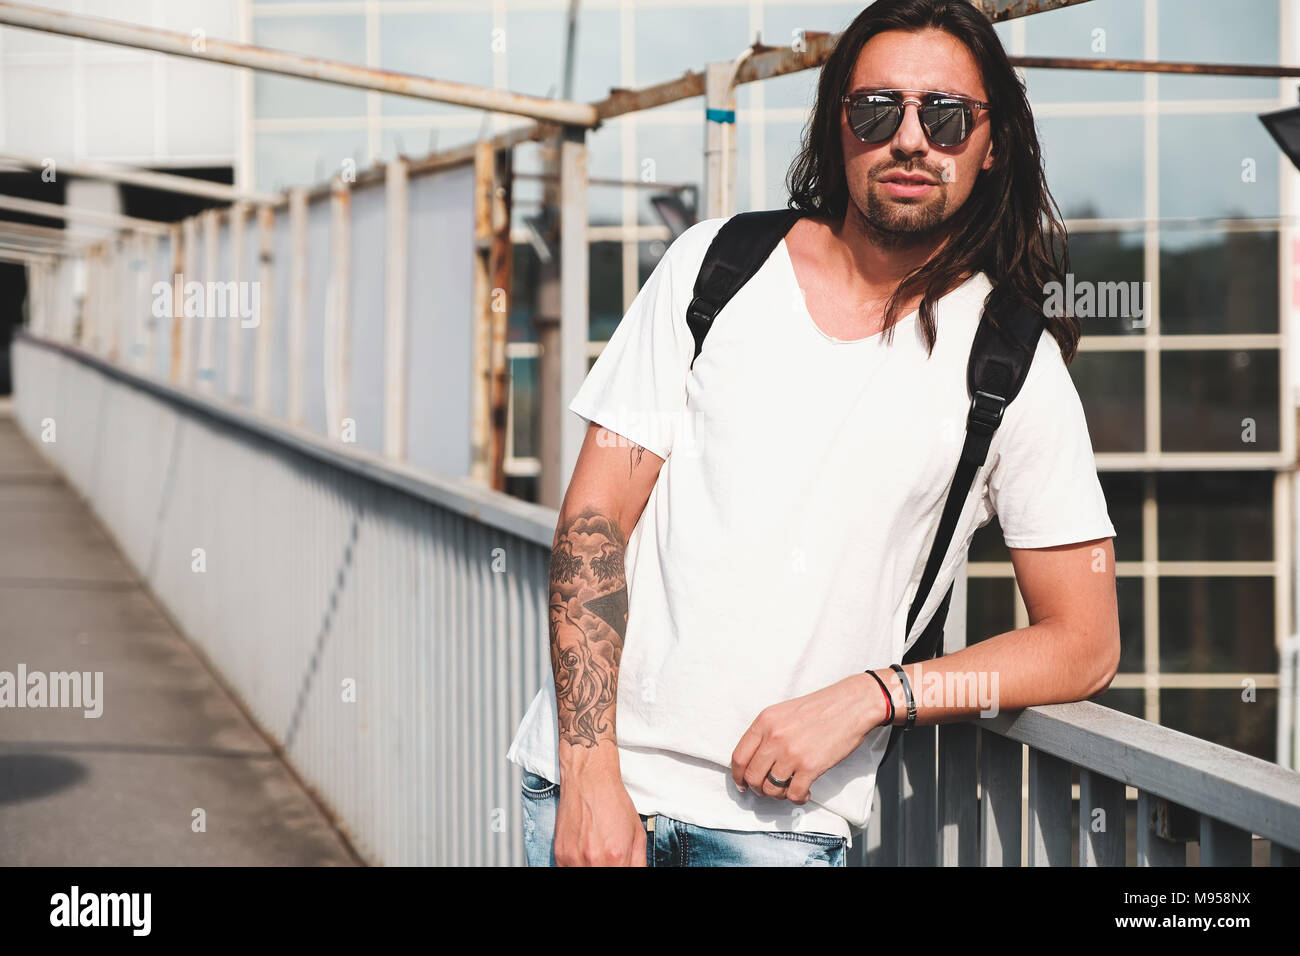 Young attractive bearded man with tattoos and long hair wearing sunglasses  white shirt and backpack posing on urban background Stock Photo  Alamy